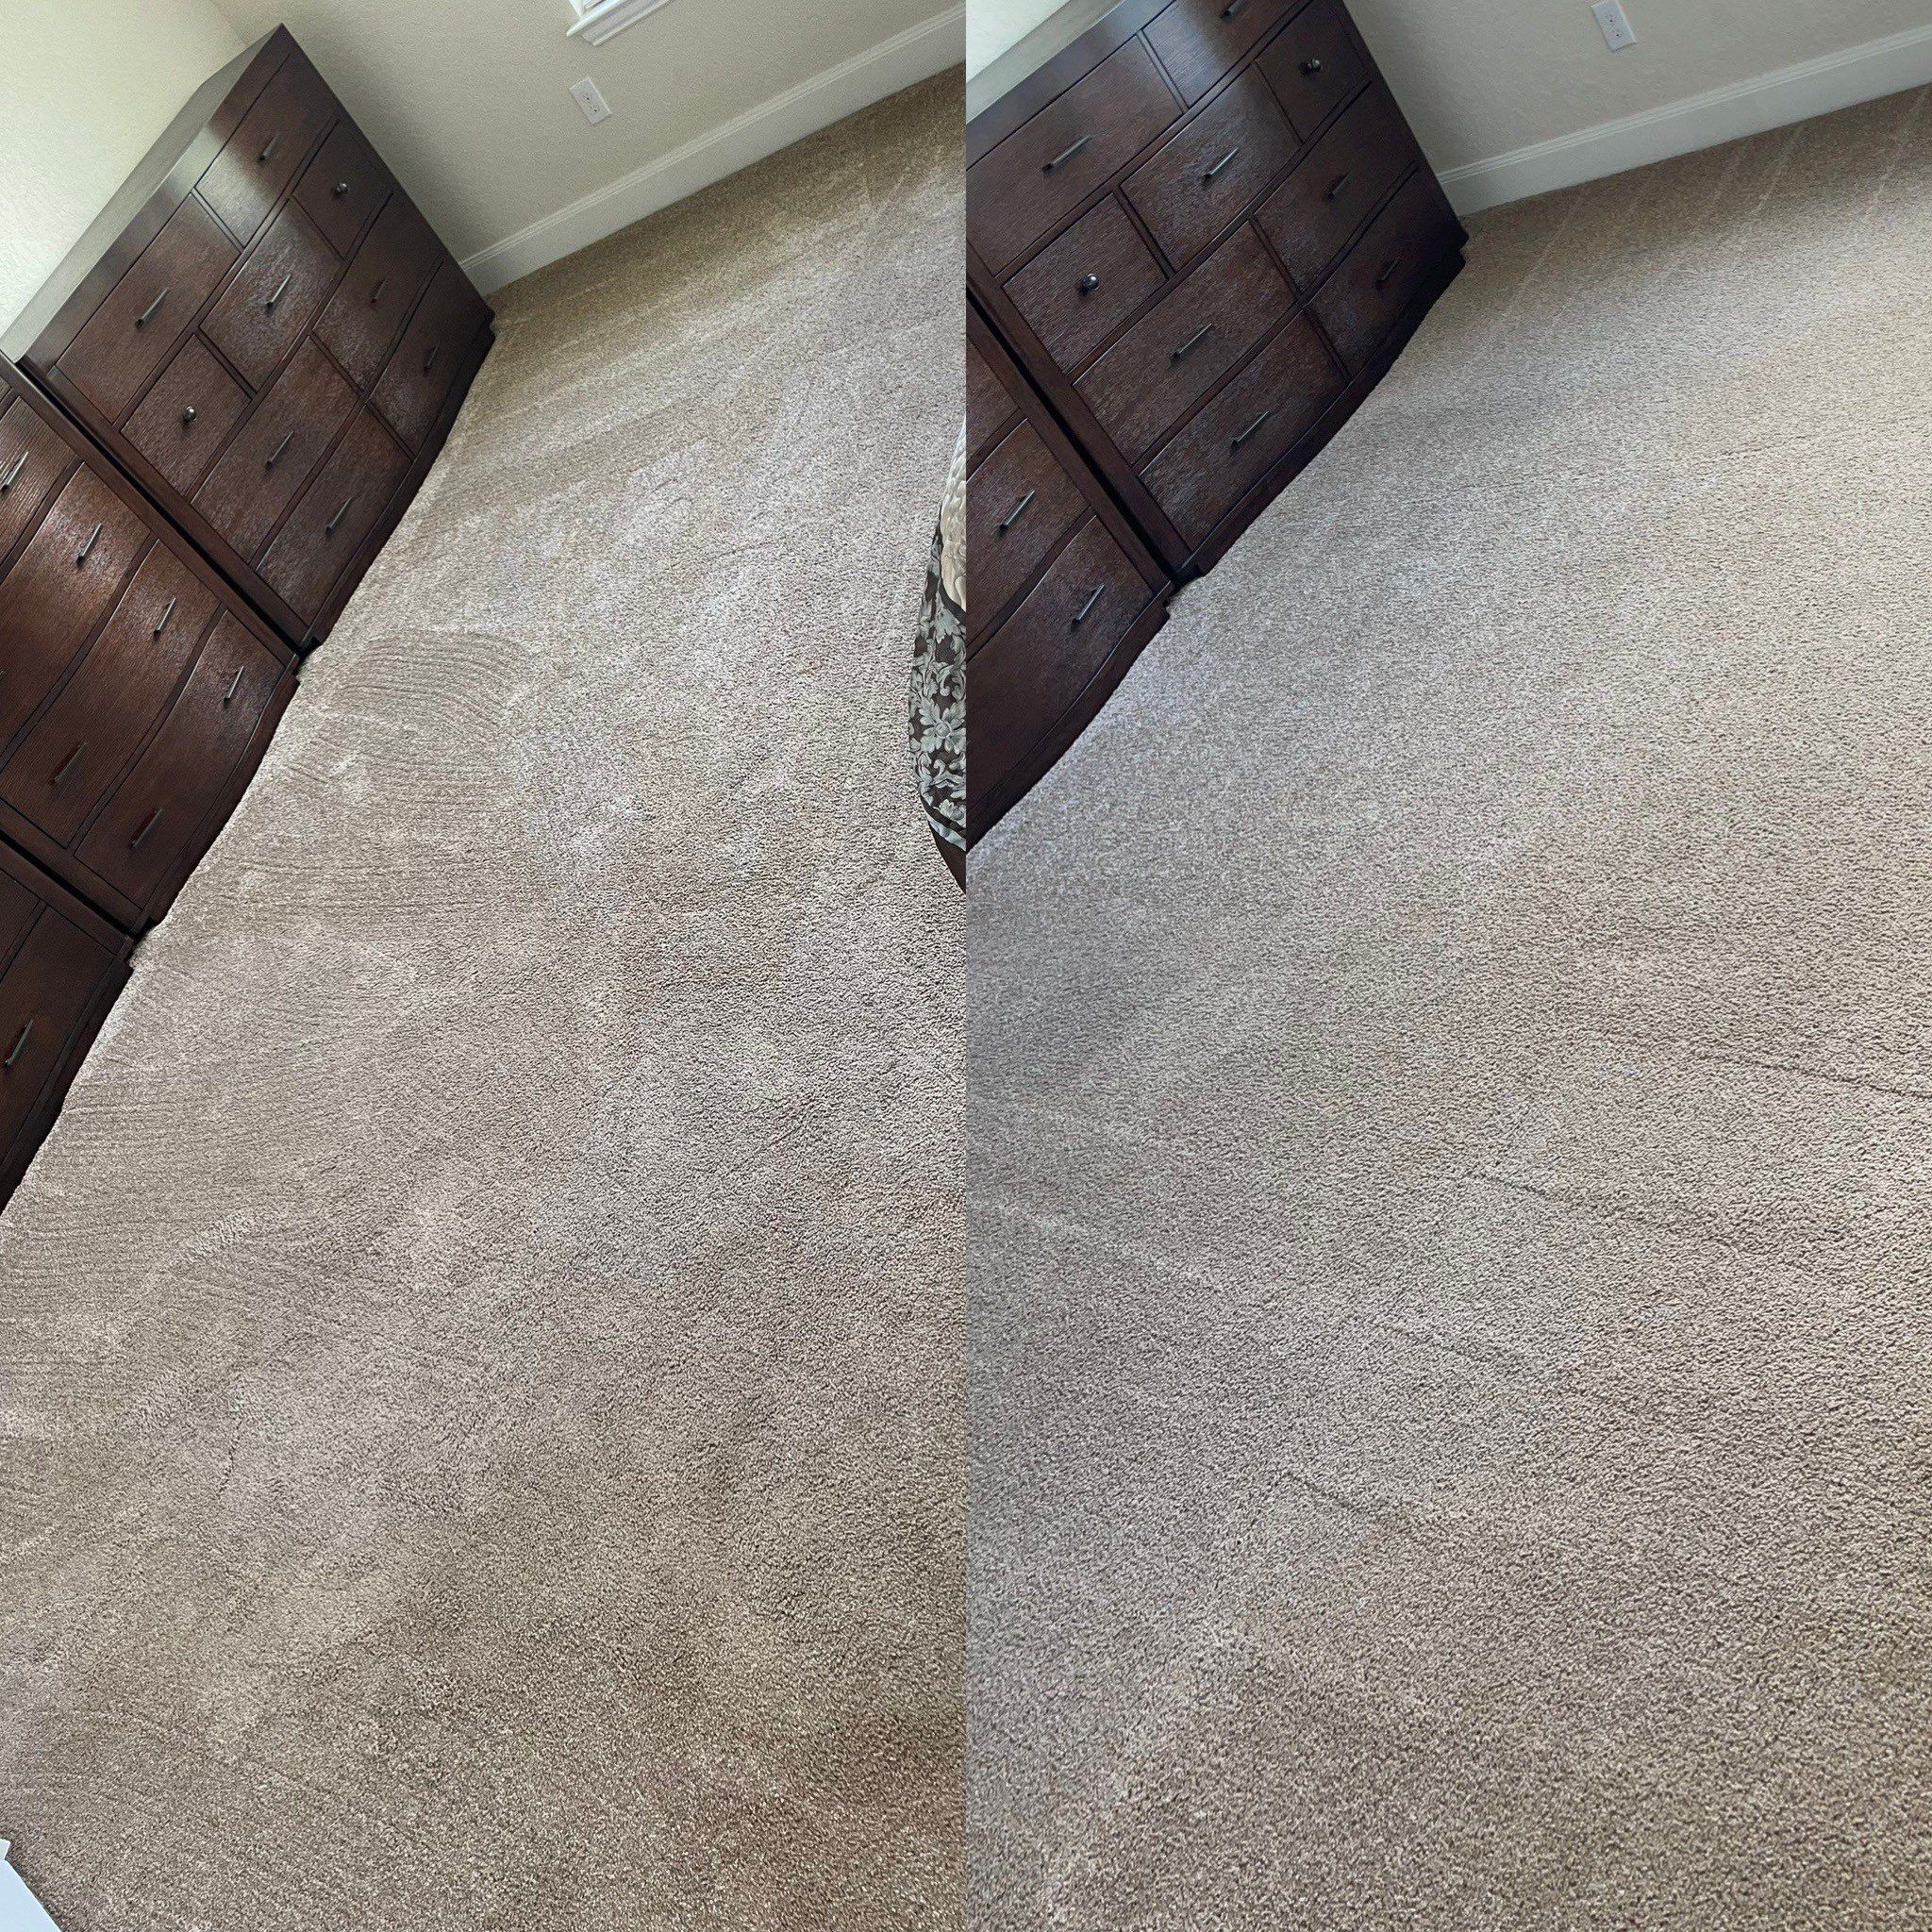 before and after deep carpet cleaning removing dirt stains rejuvenating carpet appearance